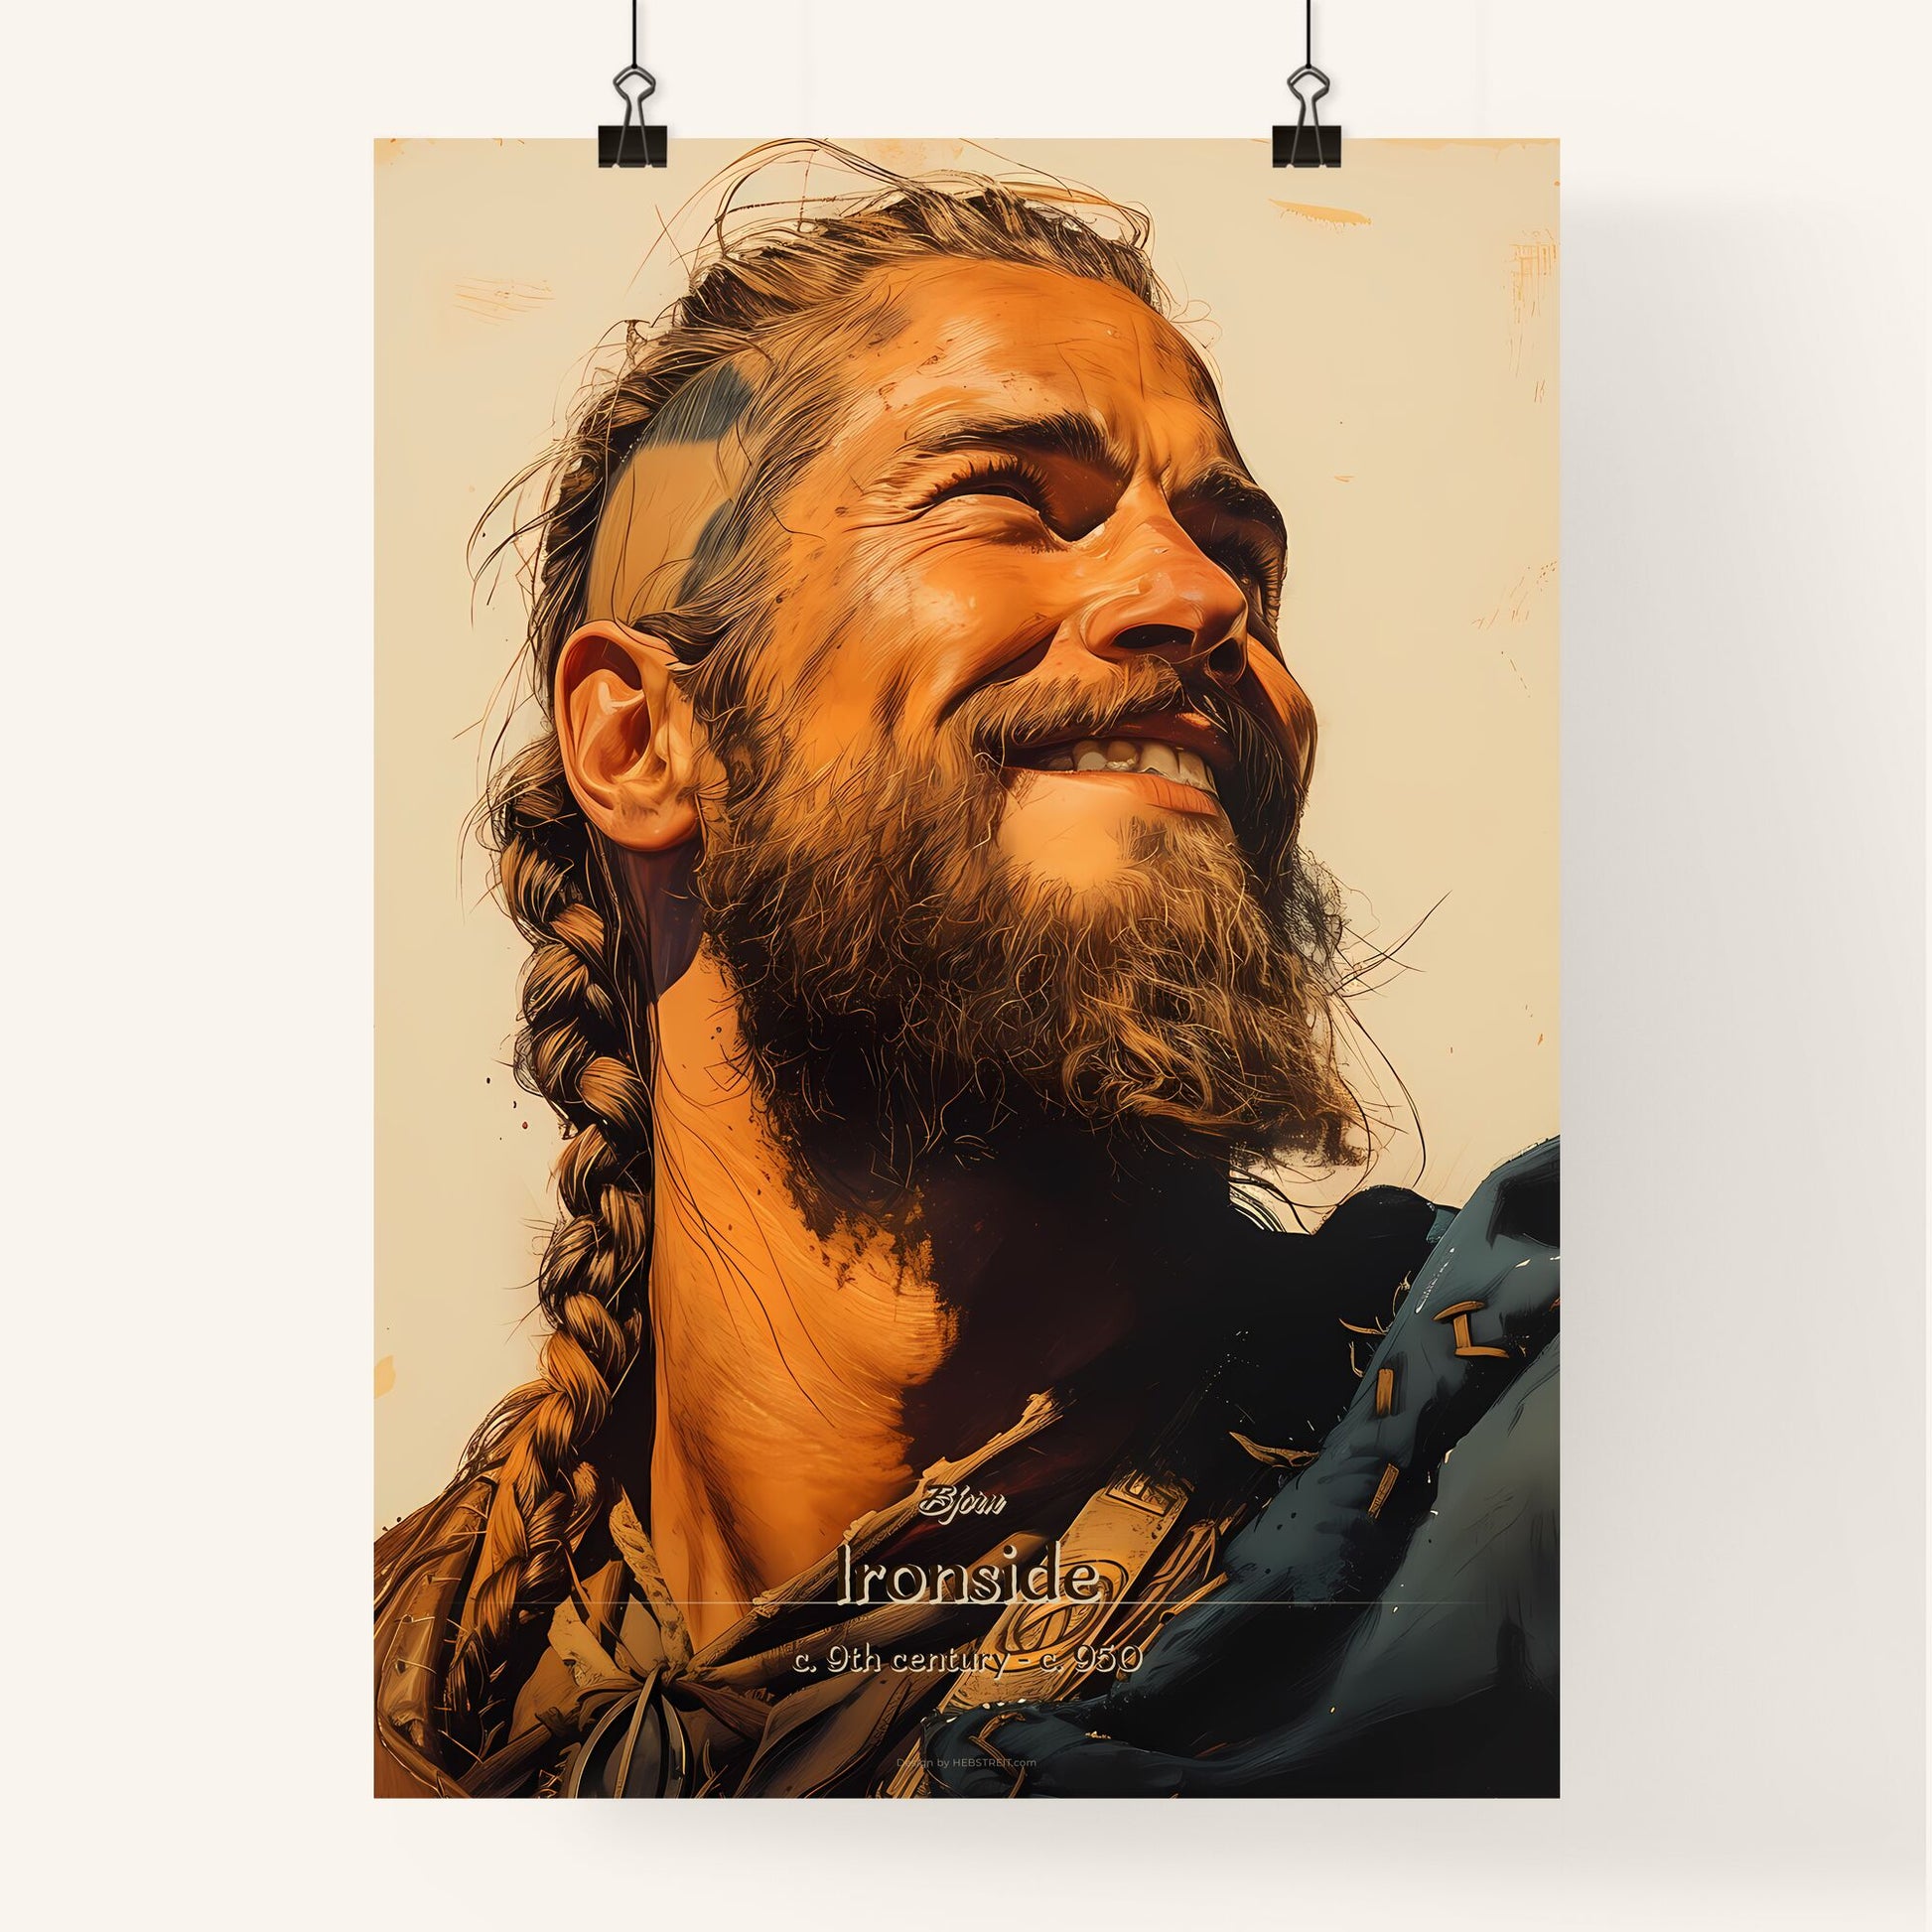 Bjorn, Ironside, c. 9th century - c. 950, A Poster of a man with a beard and braided hair Default Title